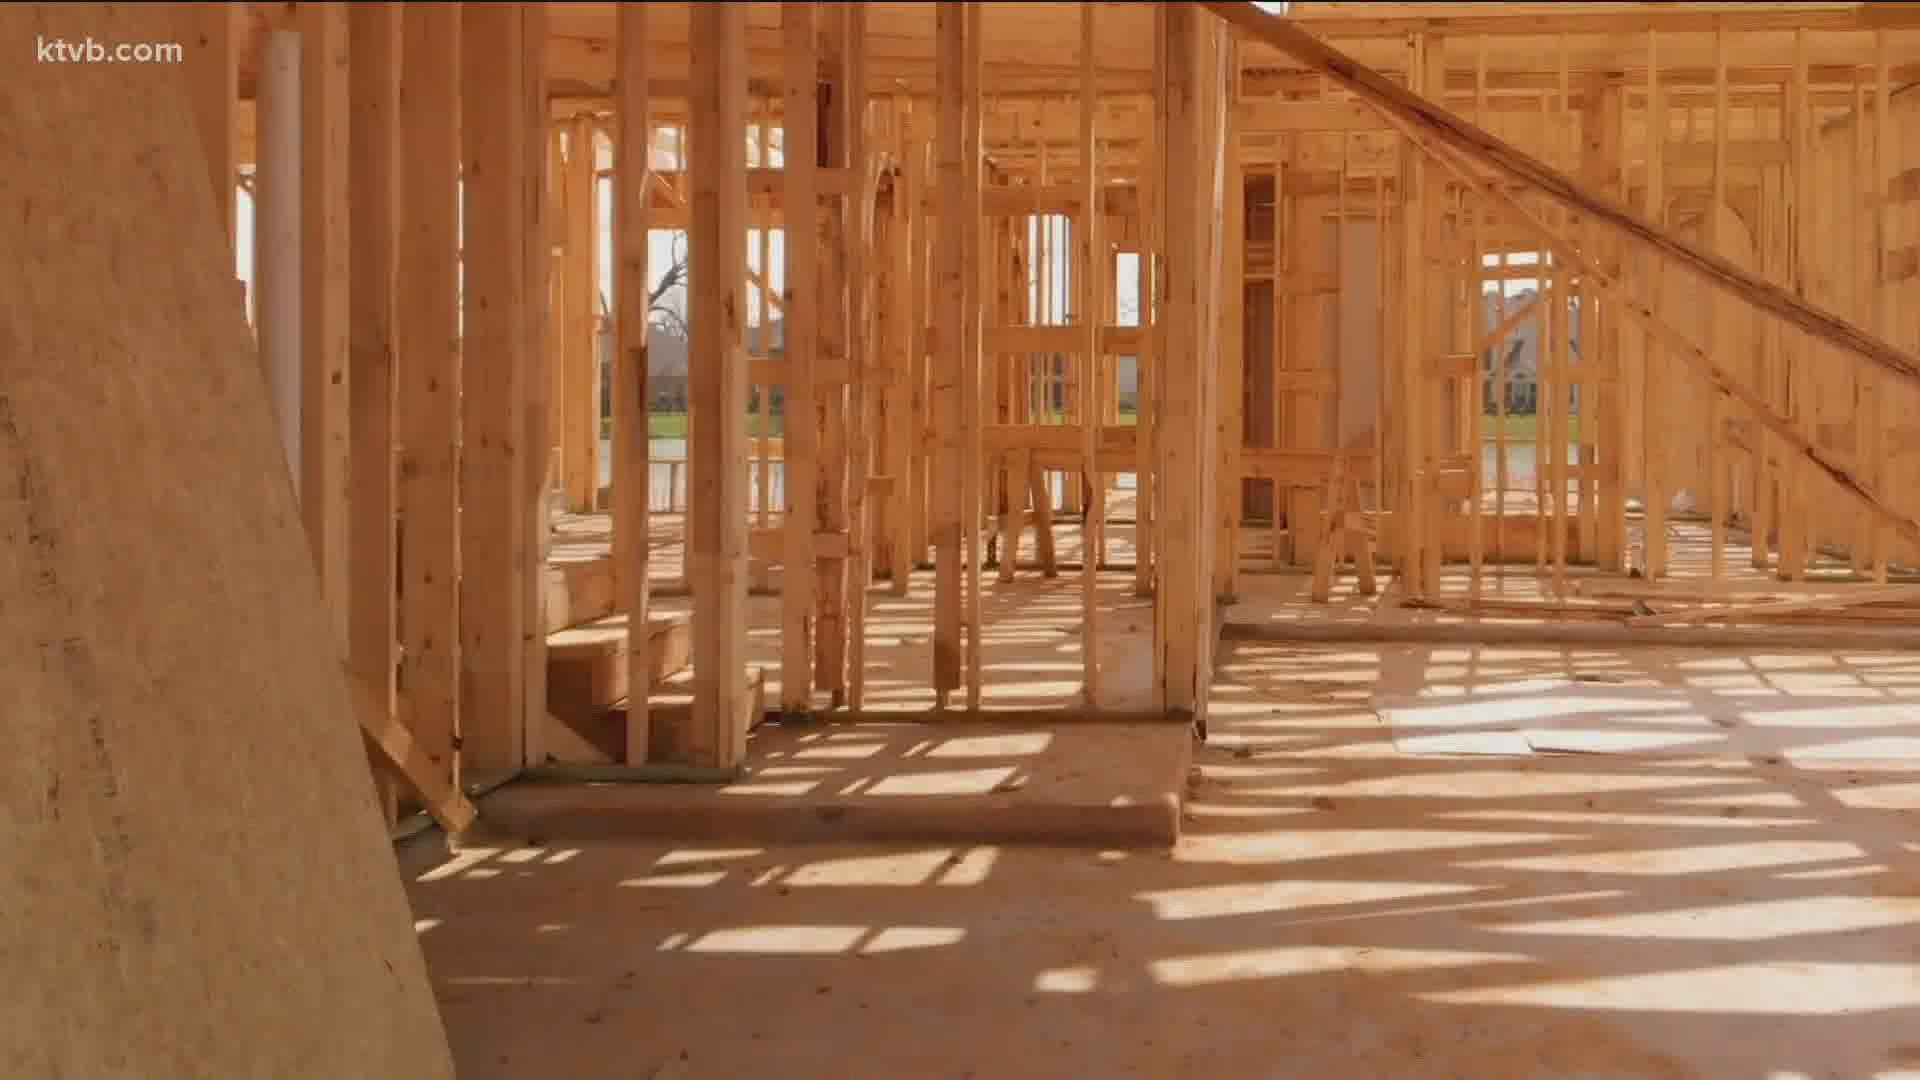 One expert told KTVB that the lumber shortage that is causing home prices to rise can be attributed to a labor shortage.